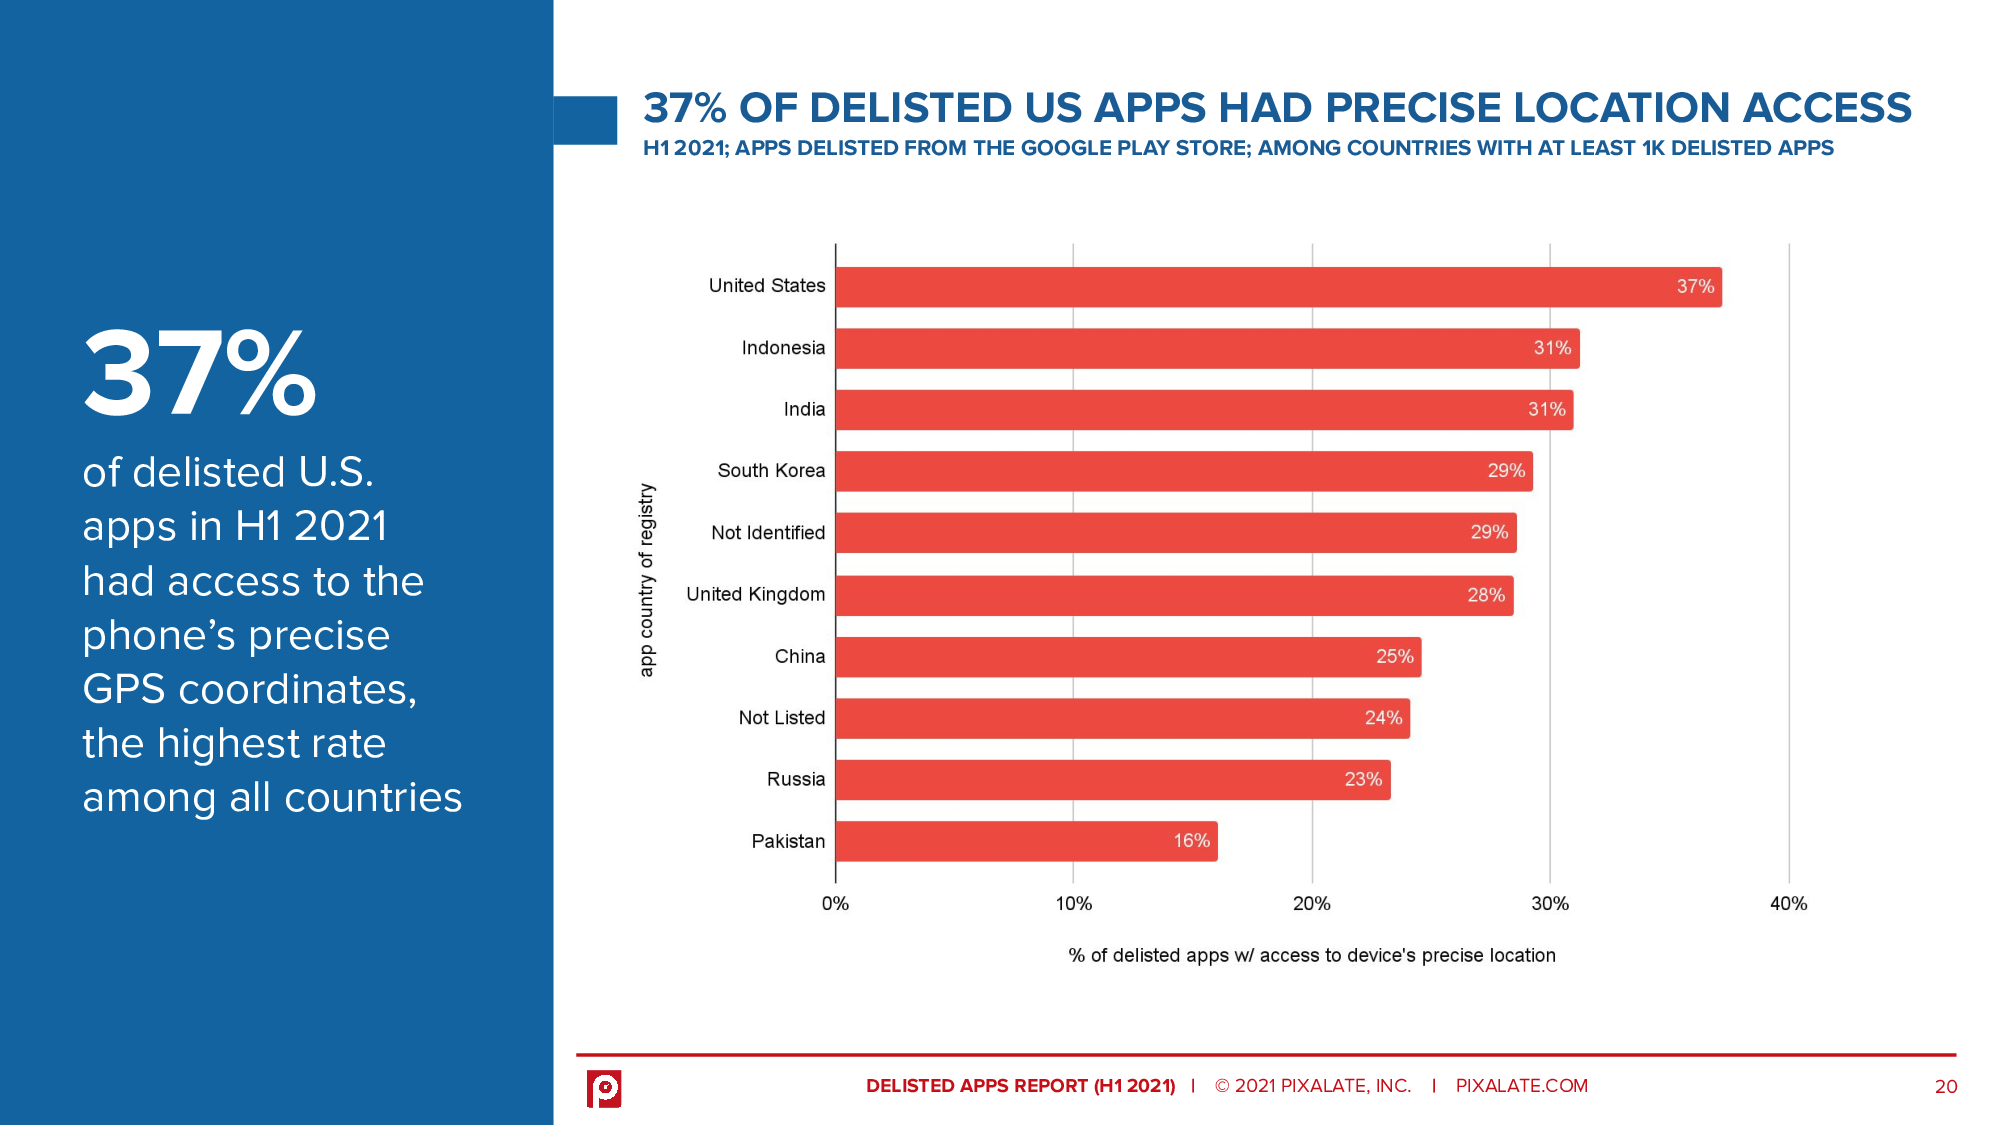 37% of delisted U.S. apps in H1 2021 had access to the phone’s precise GPS coordinates, the highest rate among all countries